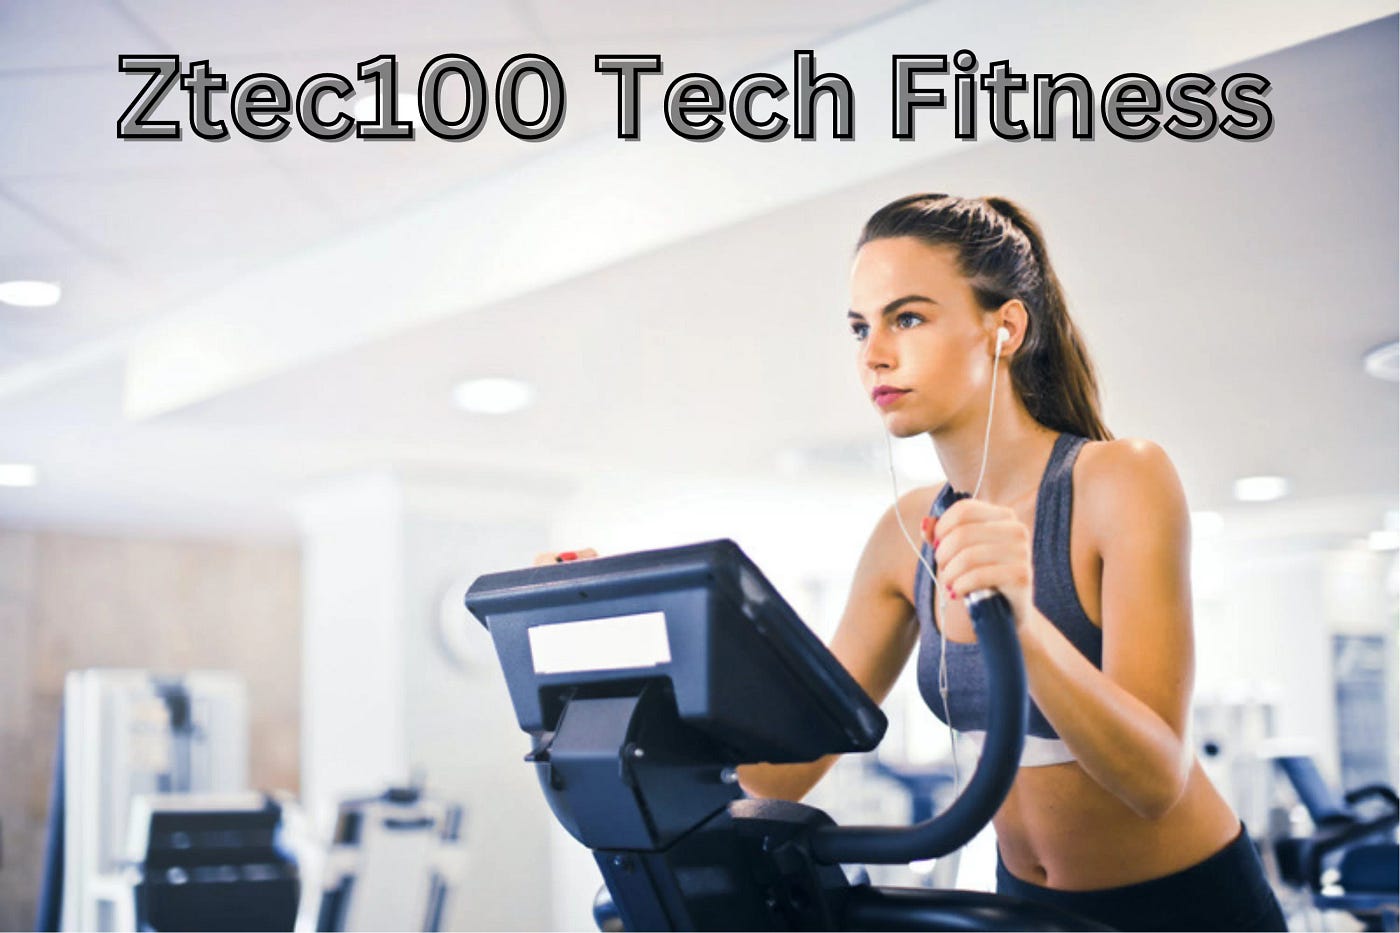 Ztec100.com: Review of Health and Fitness Offerings